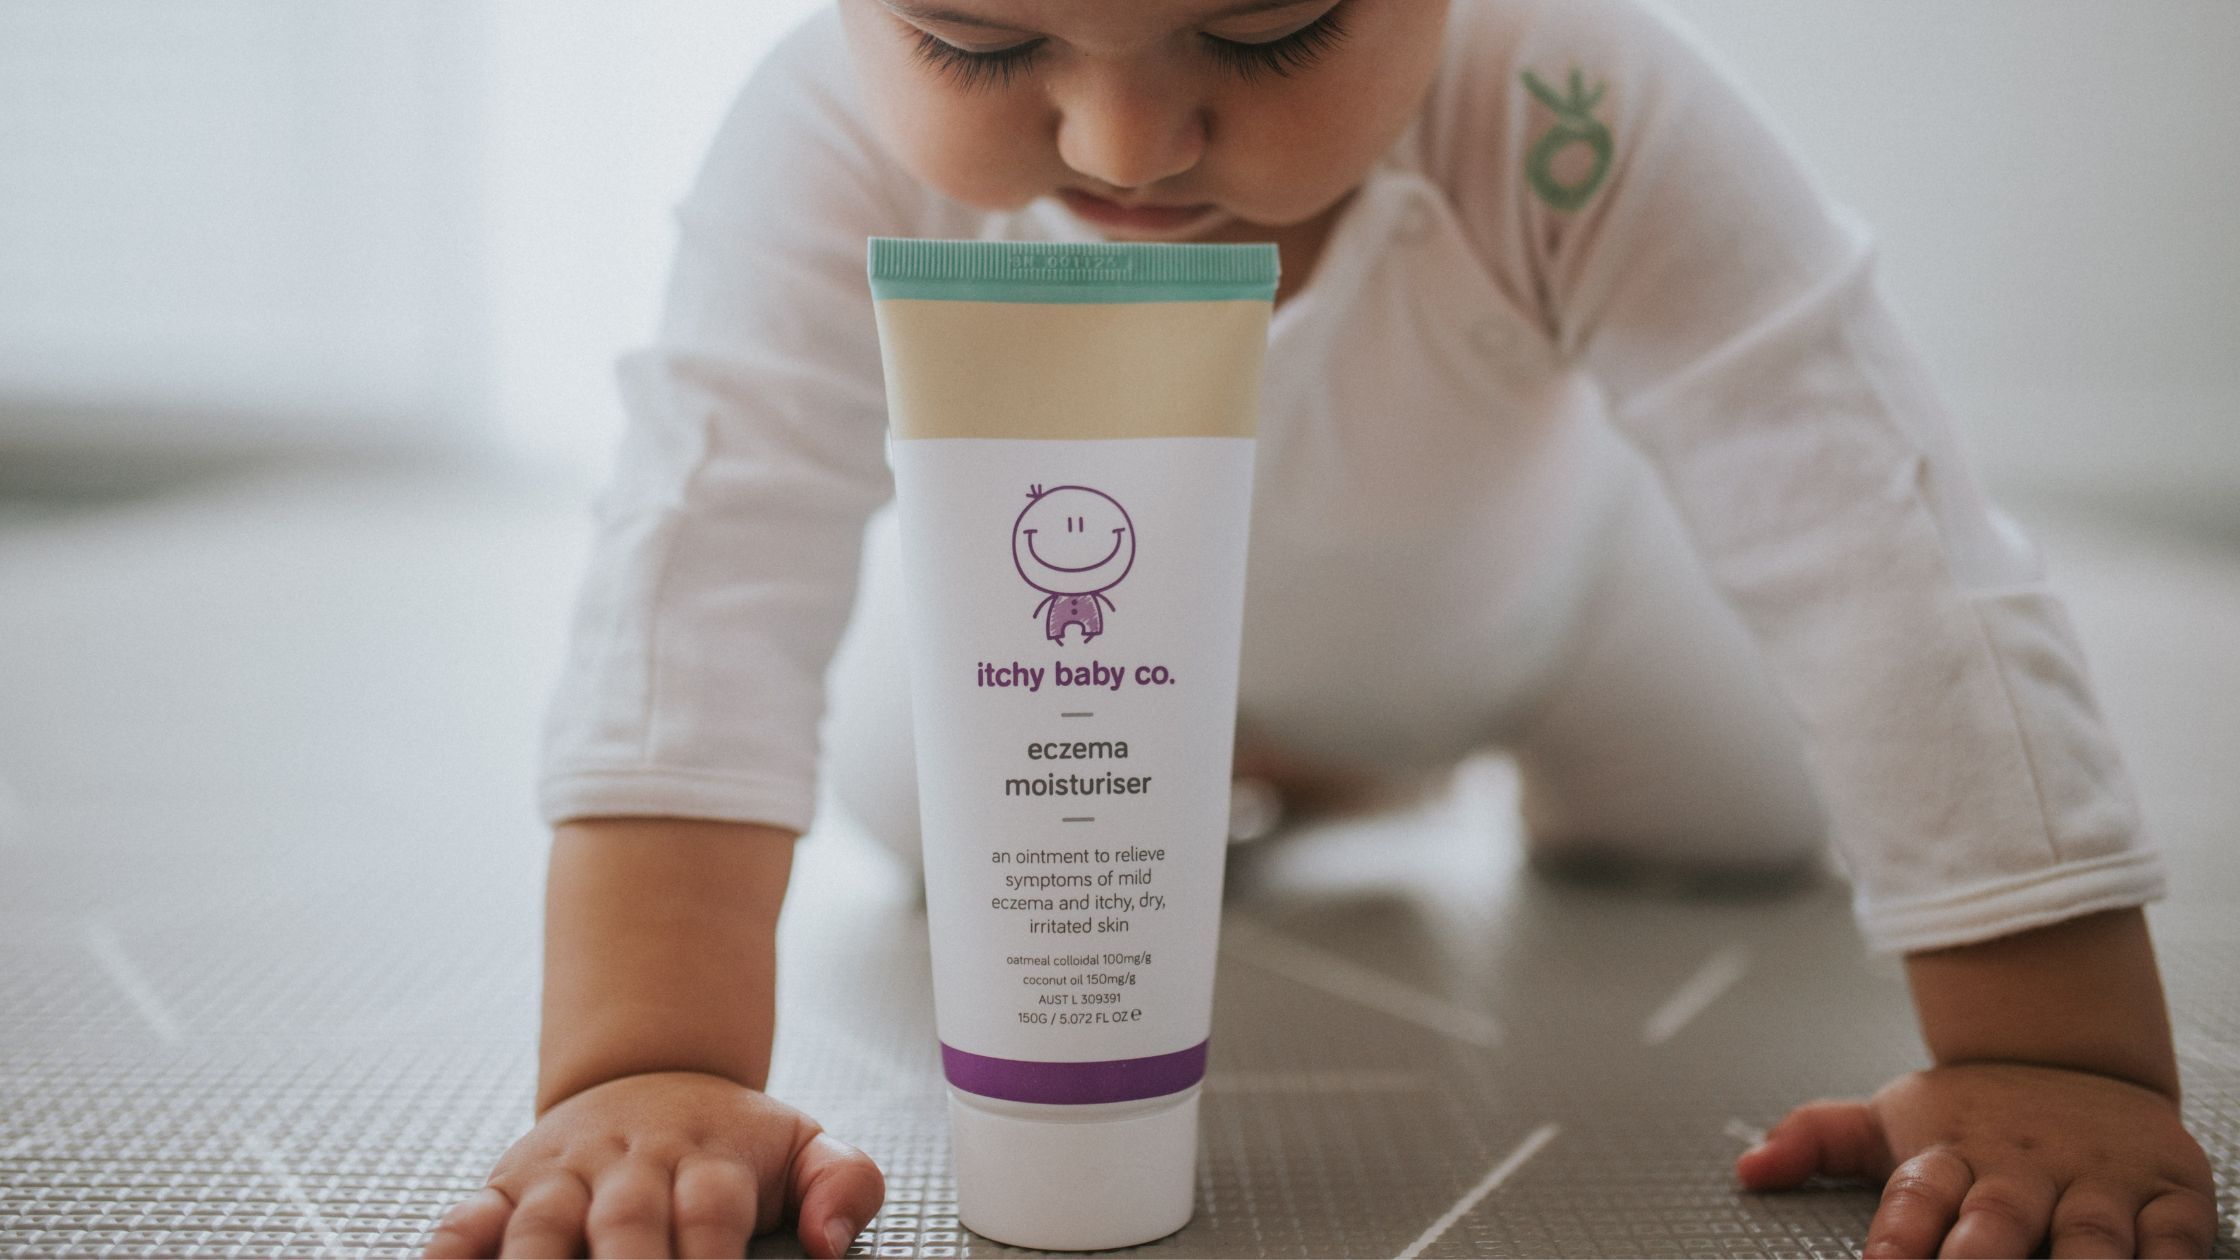 What makes Itchy Baby Co's Eczema Moisturiser different?